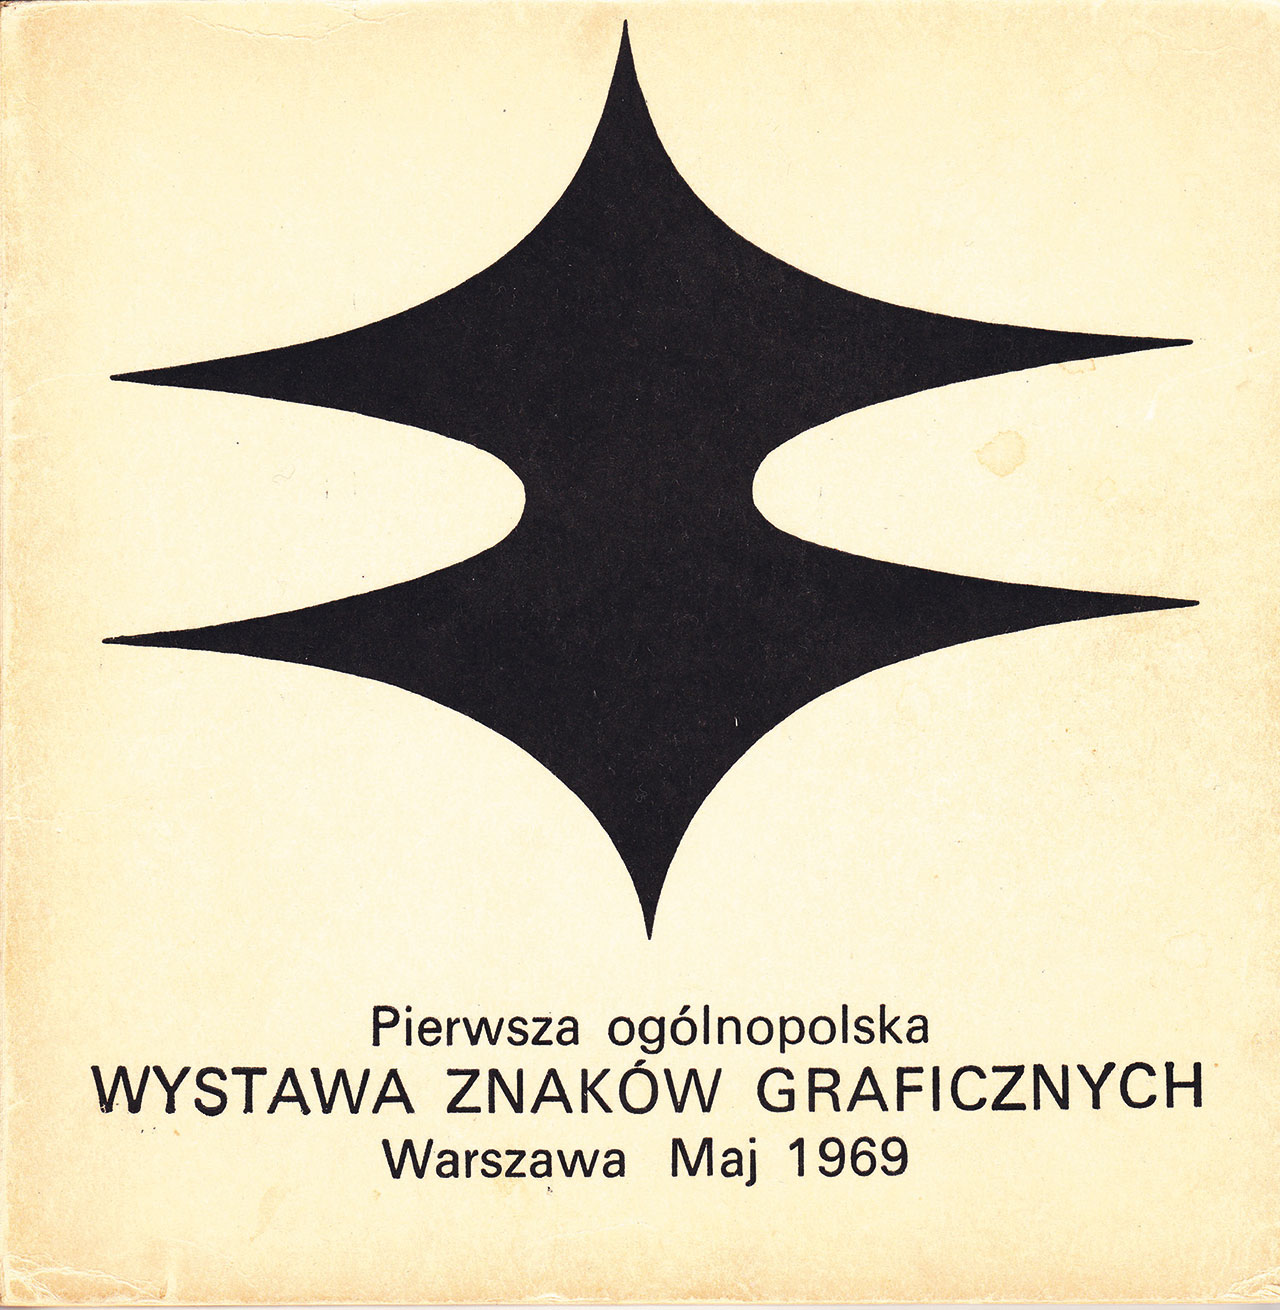 Catalogue of the First Polish Exhibition of Graphic Symbols, 1969.
Courtesy Museum of Modern Art in Warsaw.